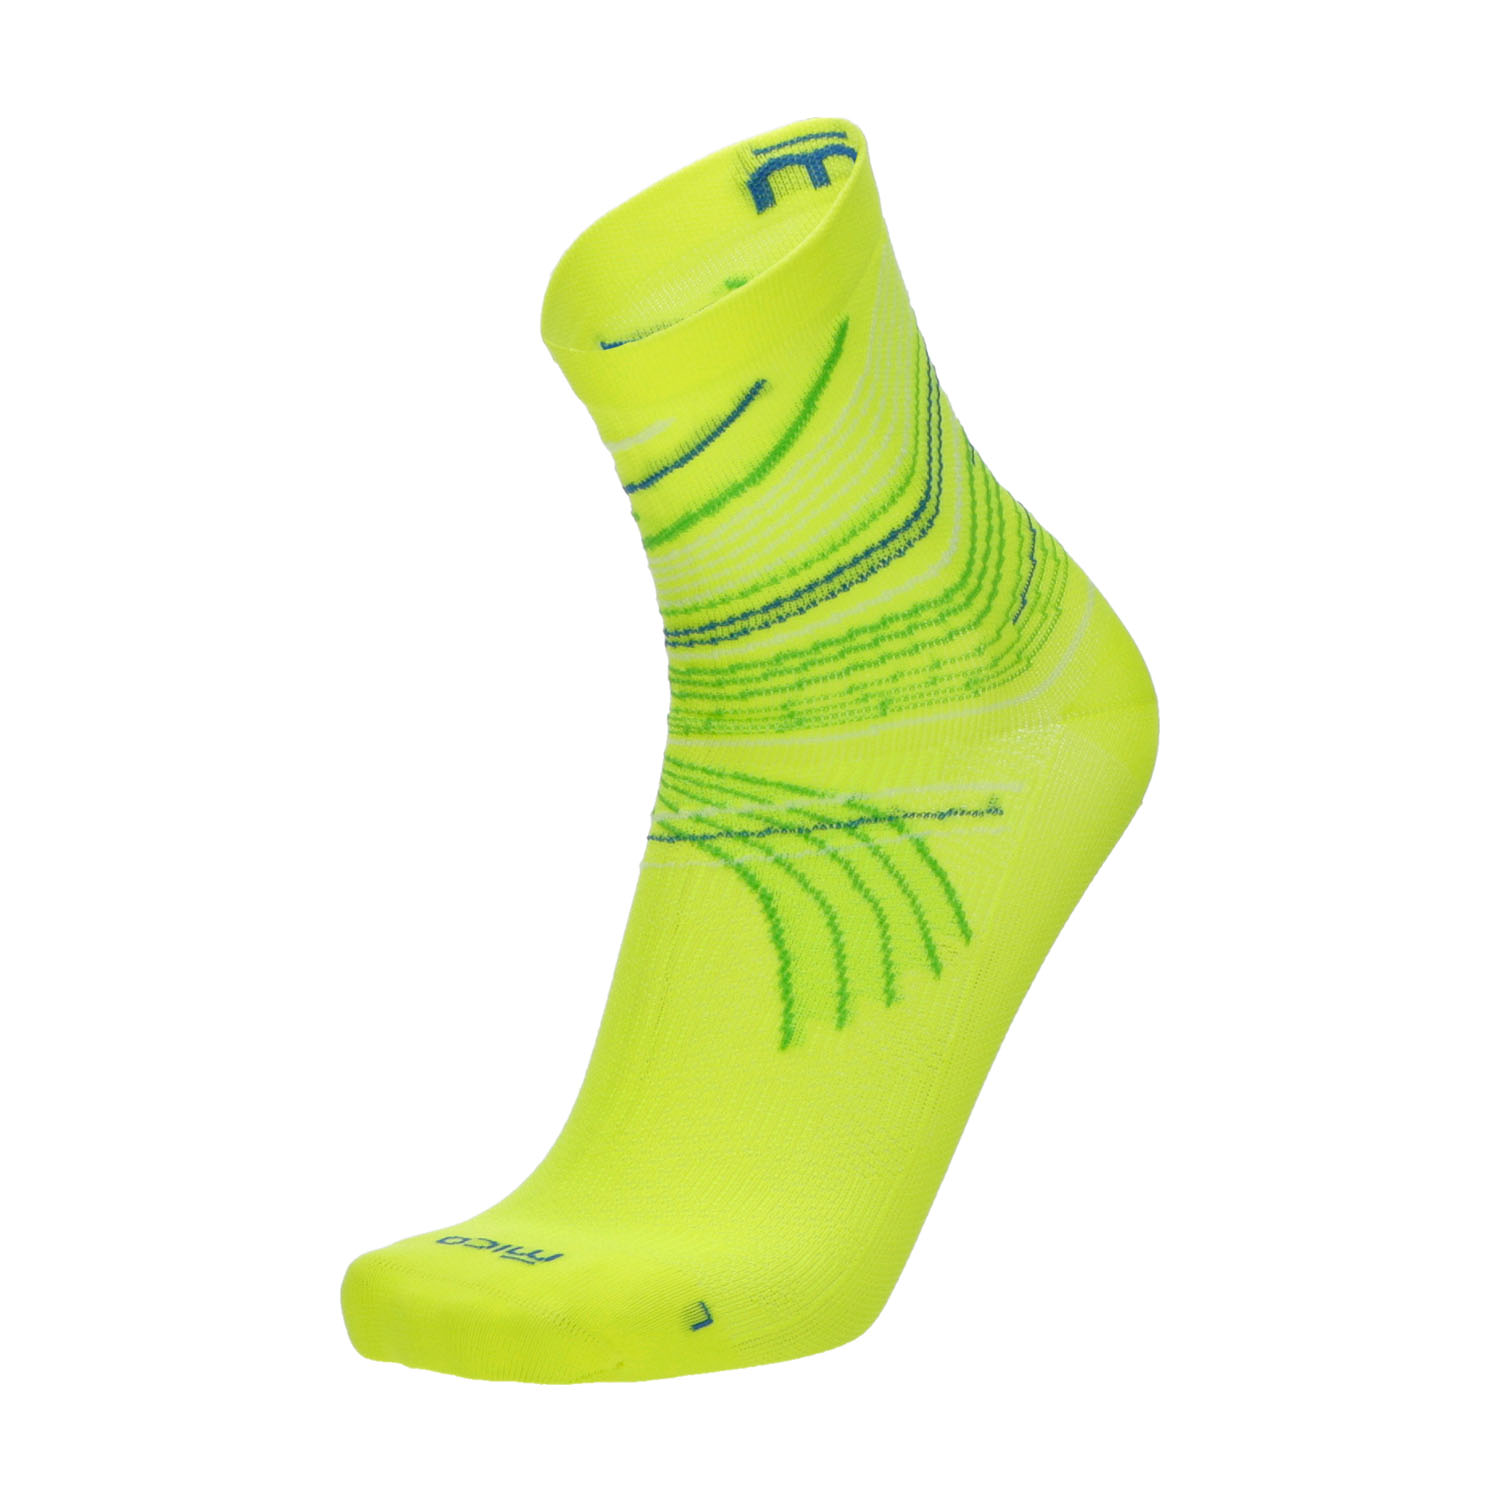 Mico Performance Extra Dry Light Weight Socks - Giallo Fluo